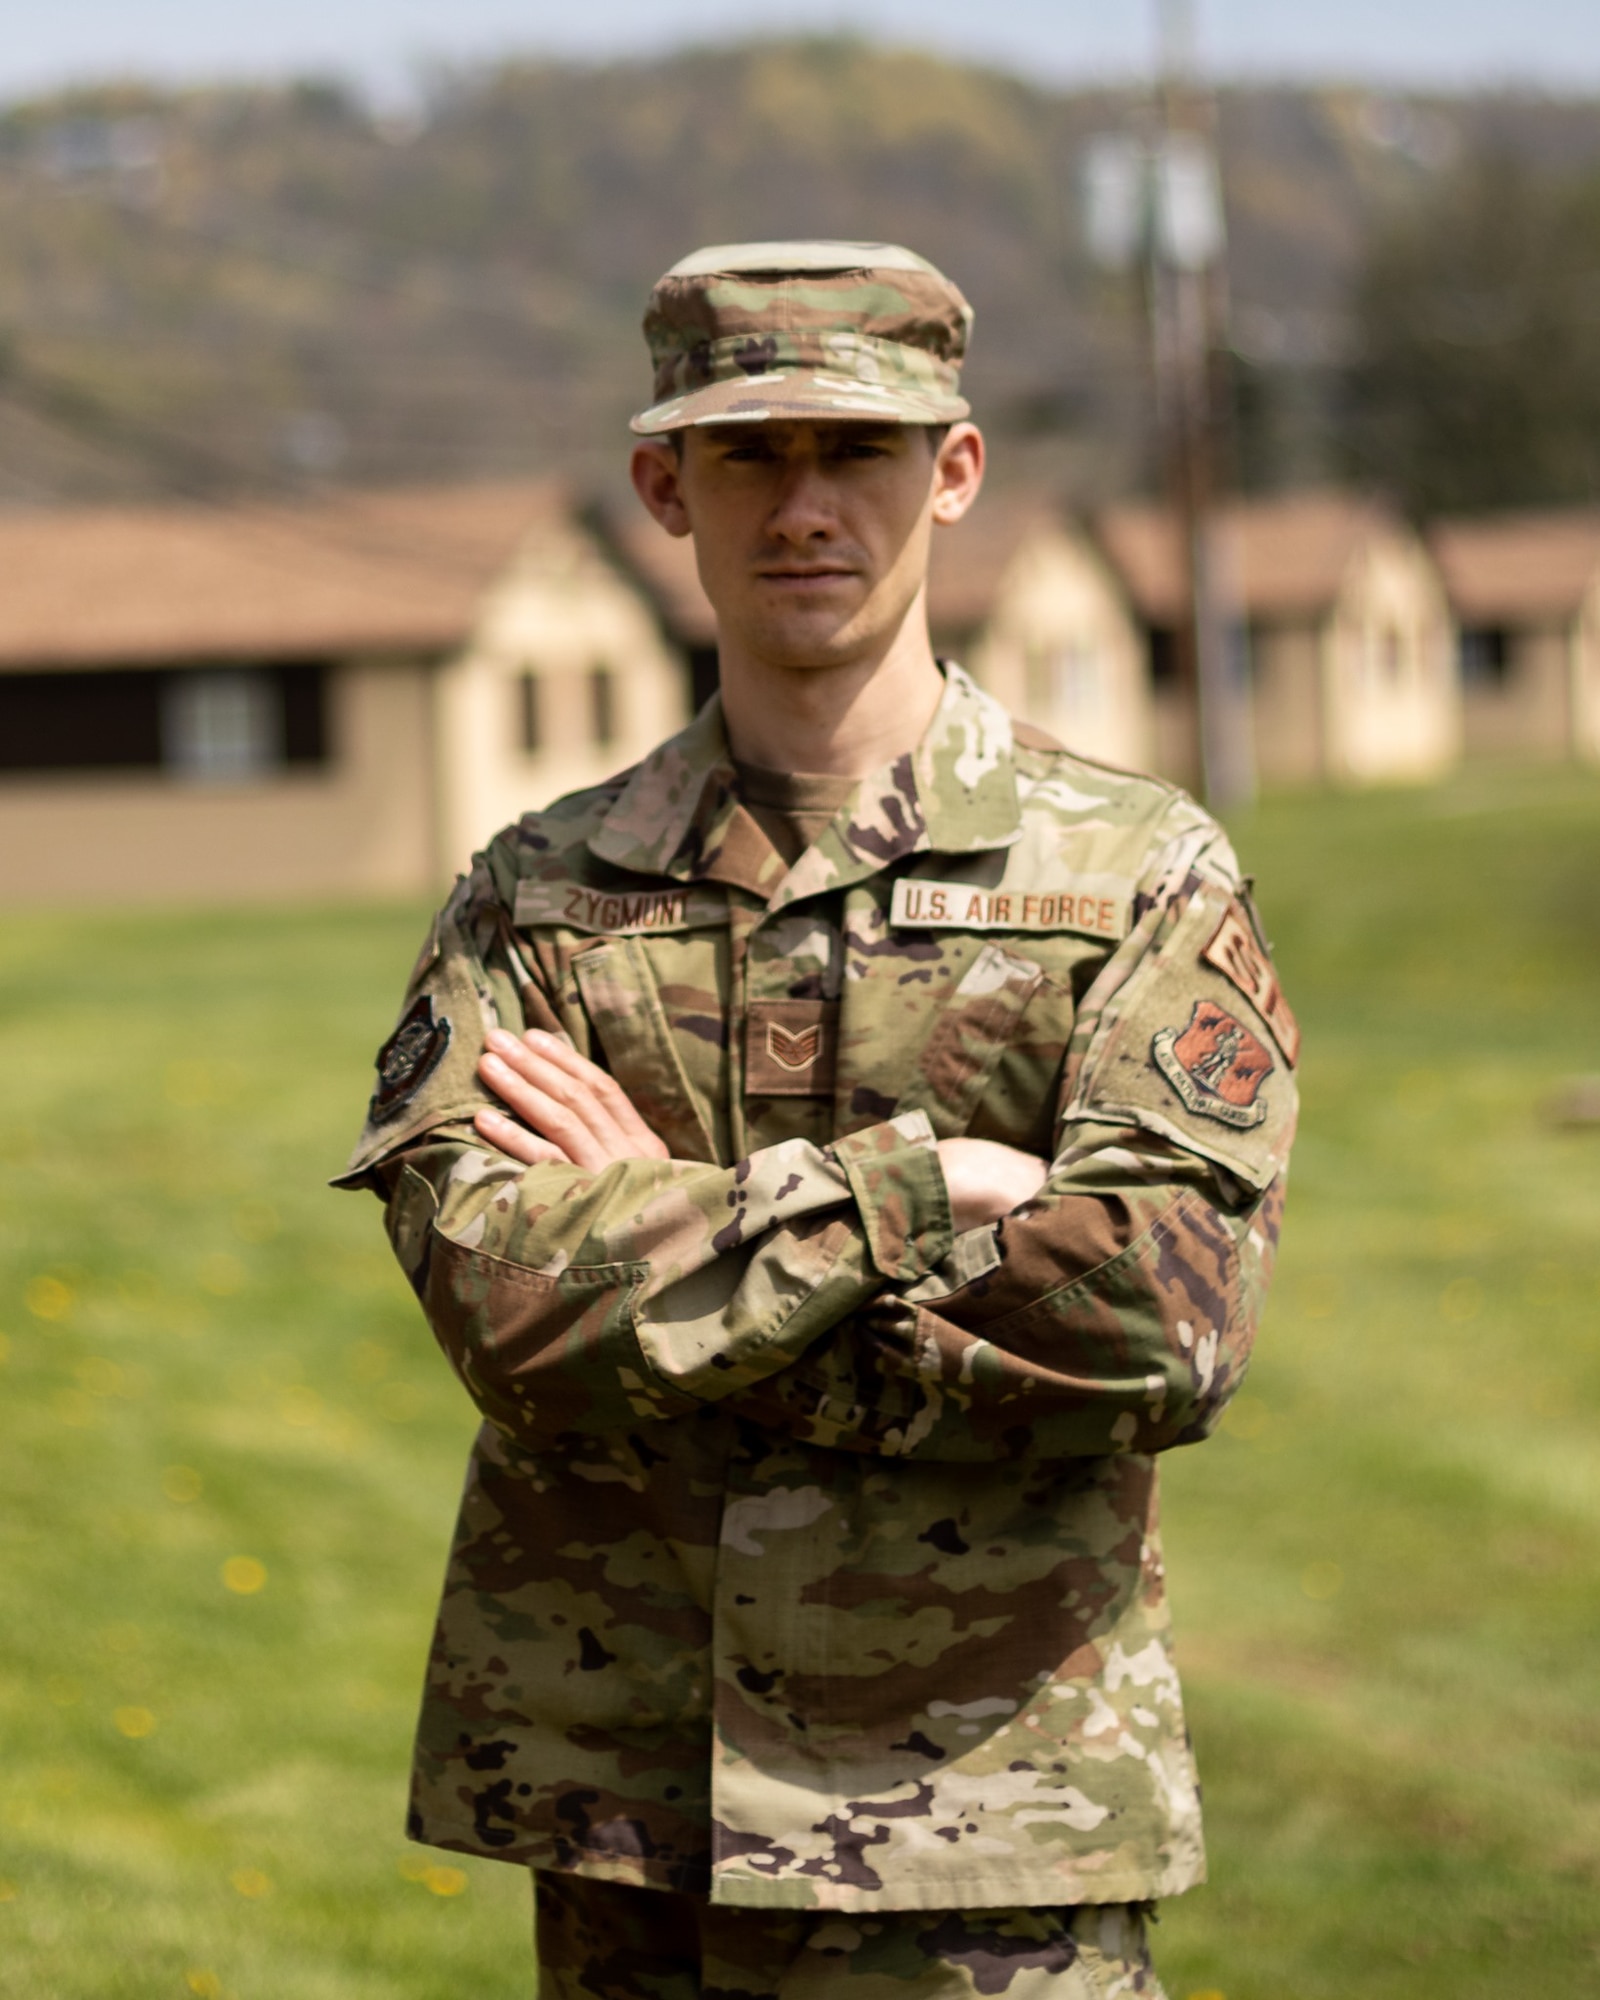 U.S. Air Force Staff Sgt. Anthony Zygmunt, a security forces specialist for the 167th Airlift Wing, poses for a photo at the start of the 2021 West Virginia Best Warrior competition at Camp Dawson in Kingwood, West Virginia, Apr. 23, 2021. Physical capabilities, leadership skills, teamwork and critical thinking are just some of abilities possessed by Airmen and Soldiers participating in the competition.